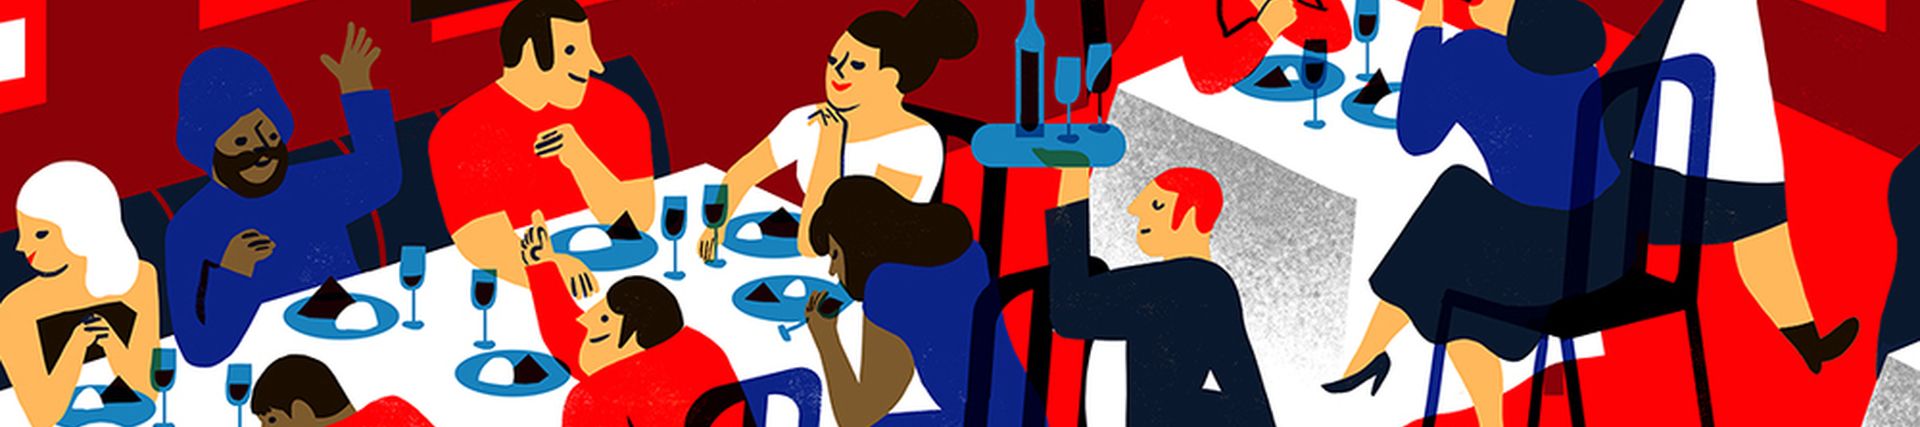 An illustration of people eating at a restaurant